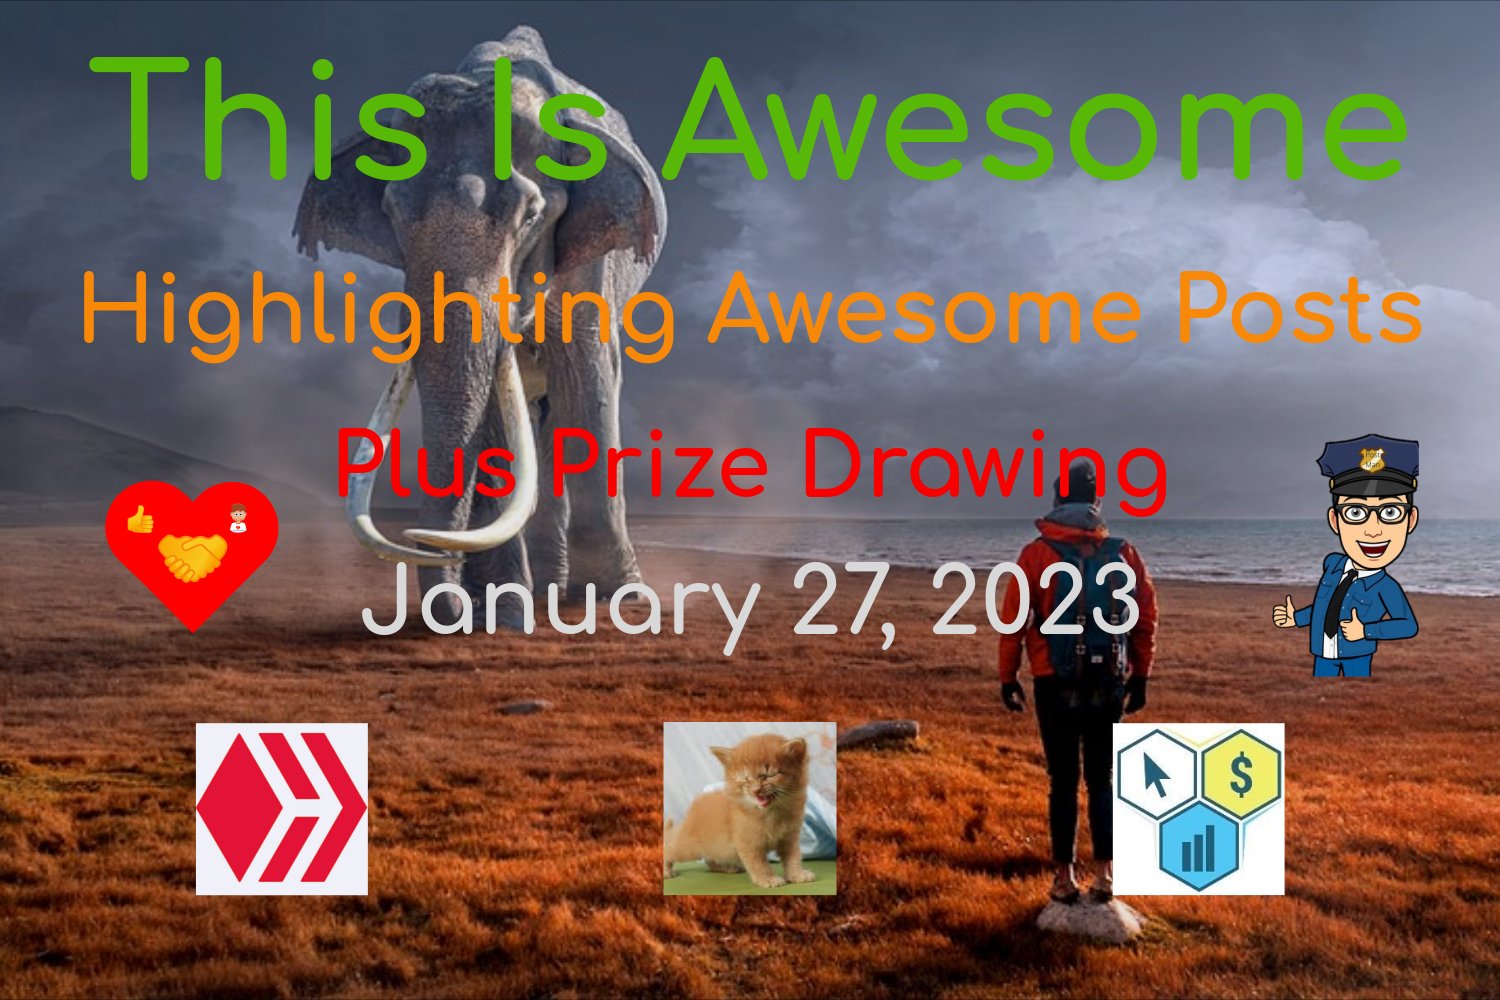 @thisisawesome/this-is-awesome-highlighting-awesome-posts-plus-prize-drawing-january-27-2023